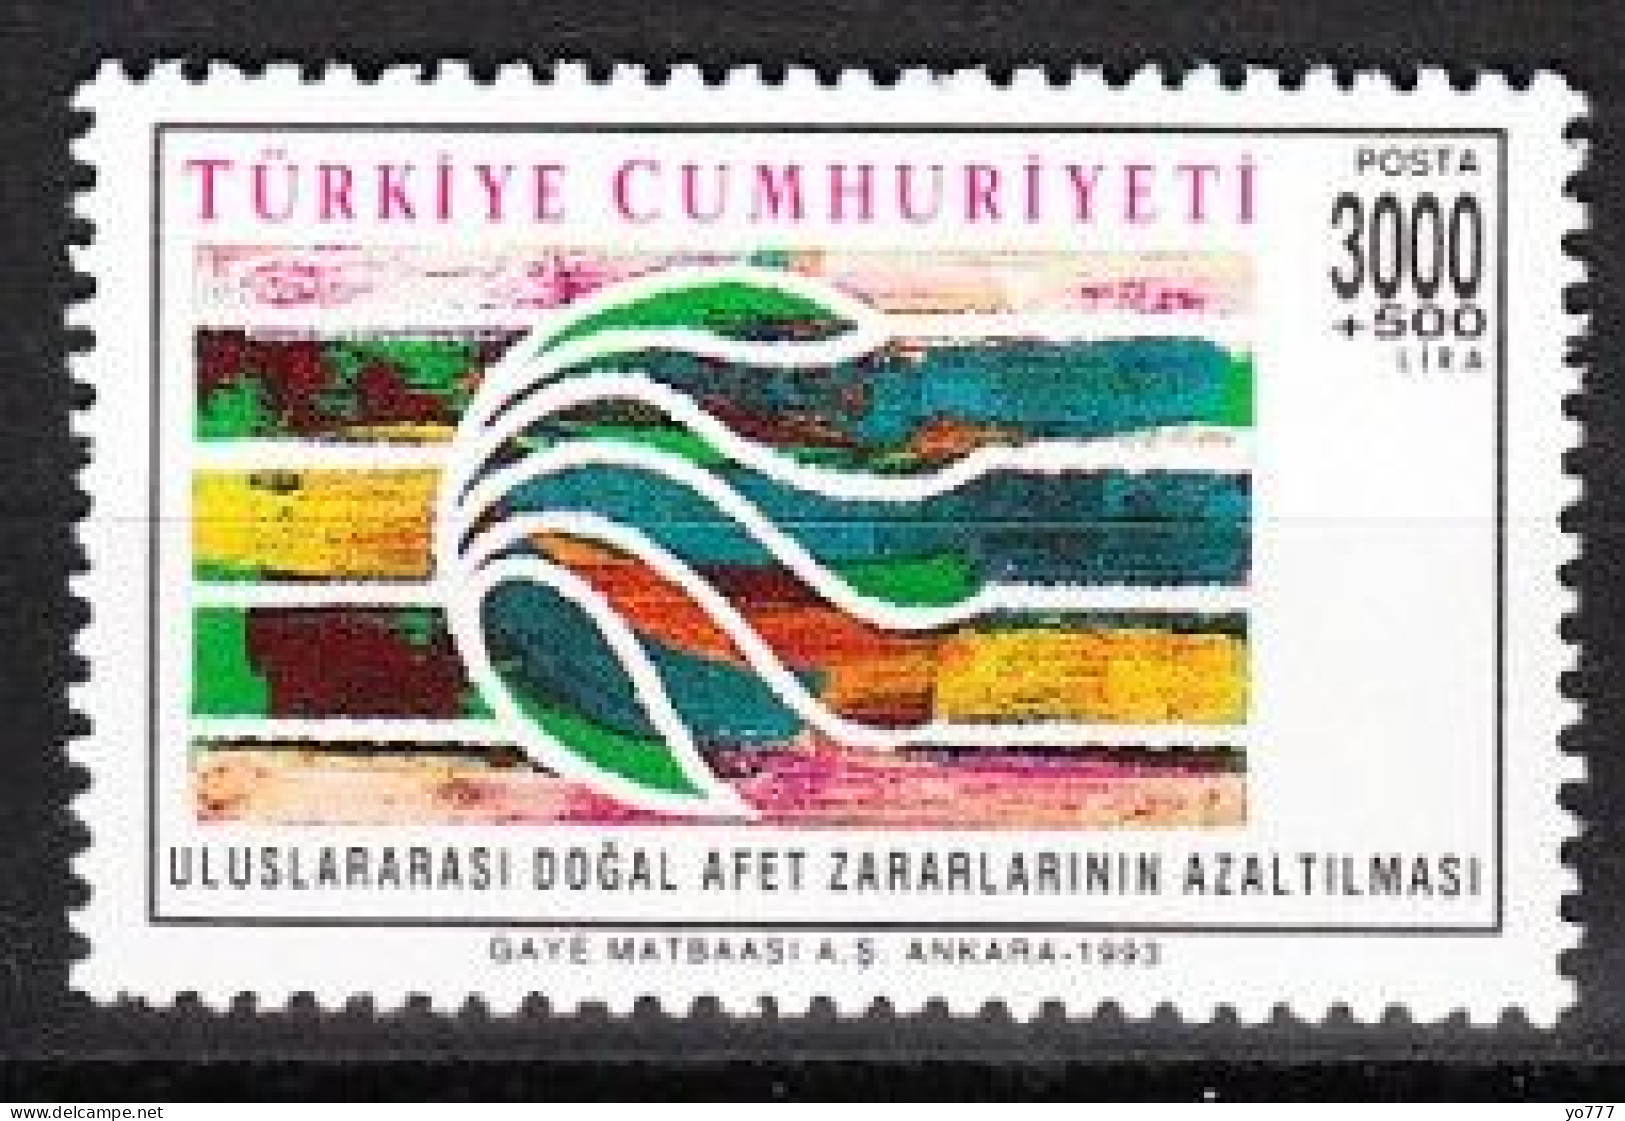 (3004) TURKEY INTERNATIONAL DAY FOR NATURAL DISASTER REDUCTION MNH** - Unused Stamps